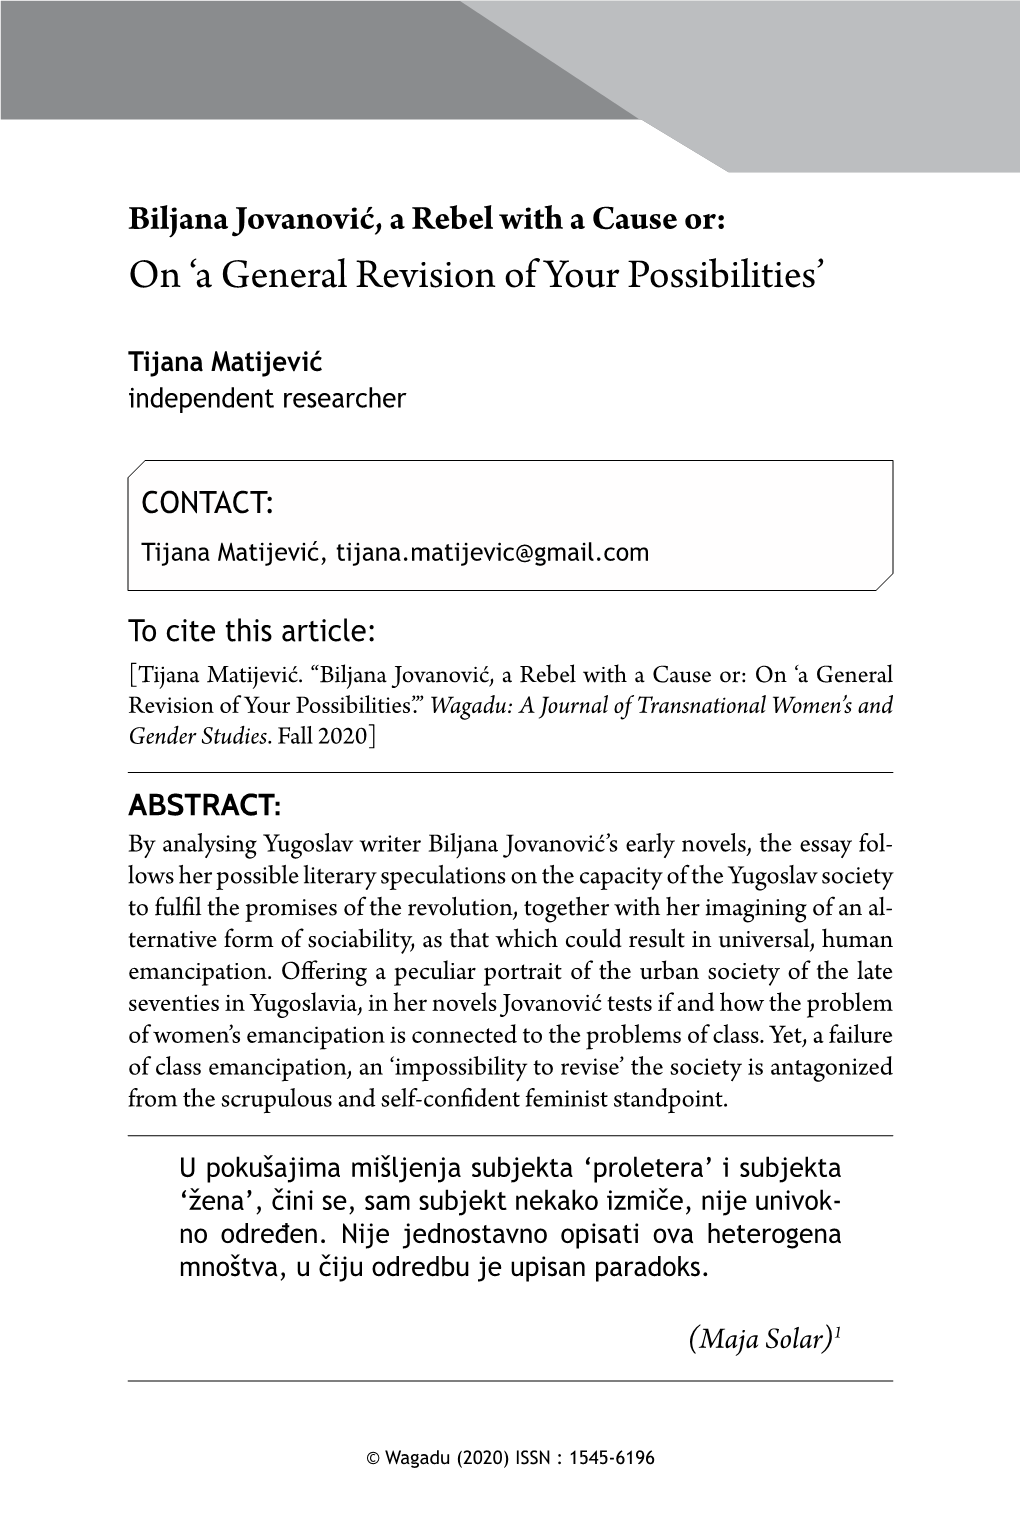 On 'A General Revision of Your Possibilities'